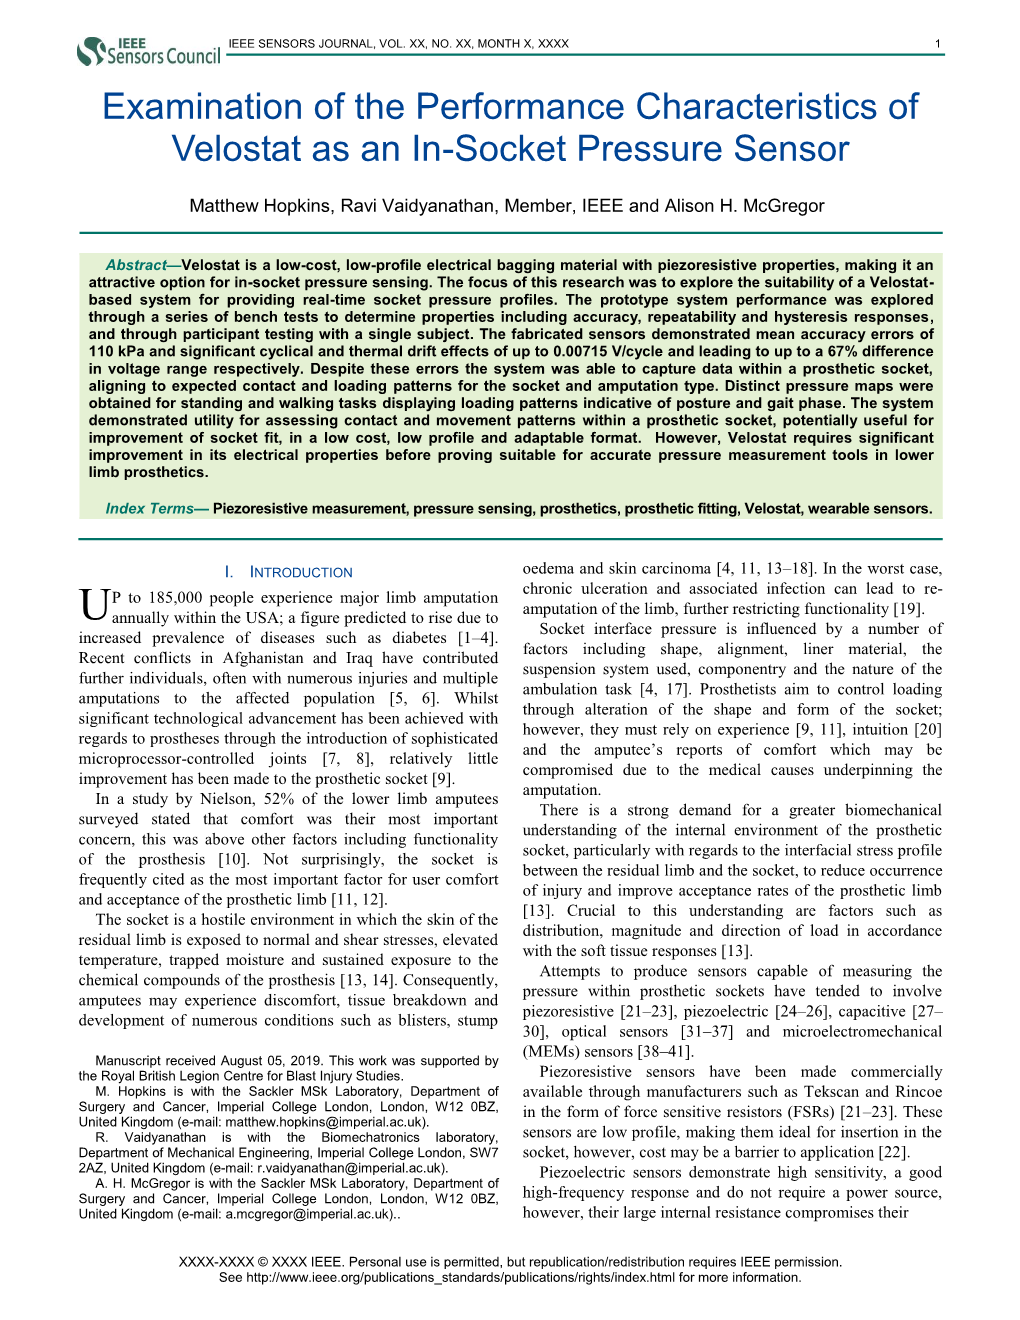 Examination of the Performance Characteristics of Velostat As an In-Socket Pressure Sensor